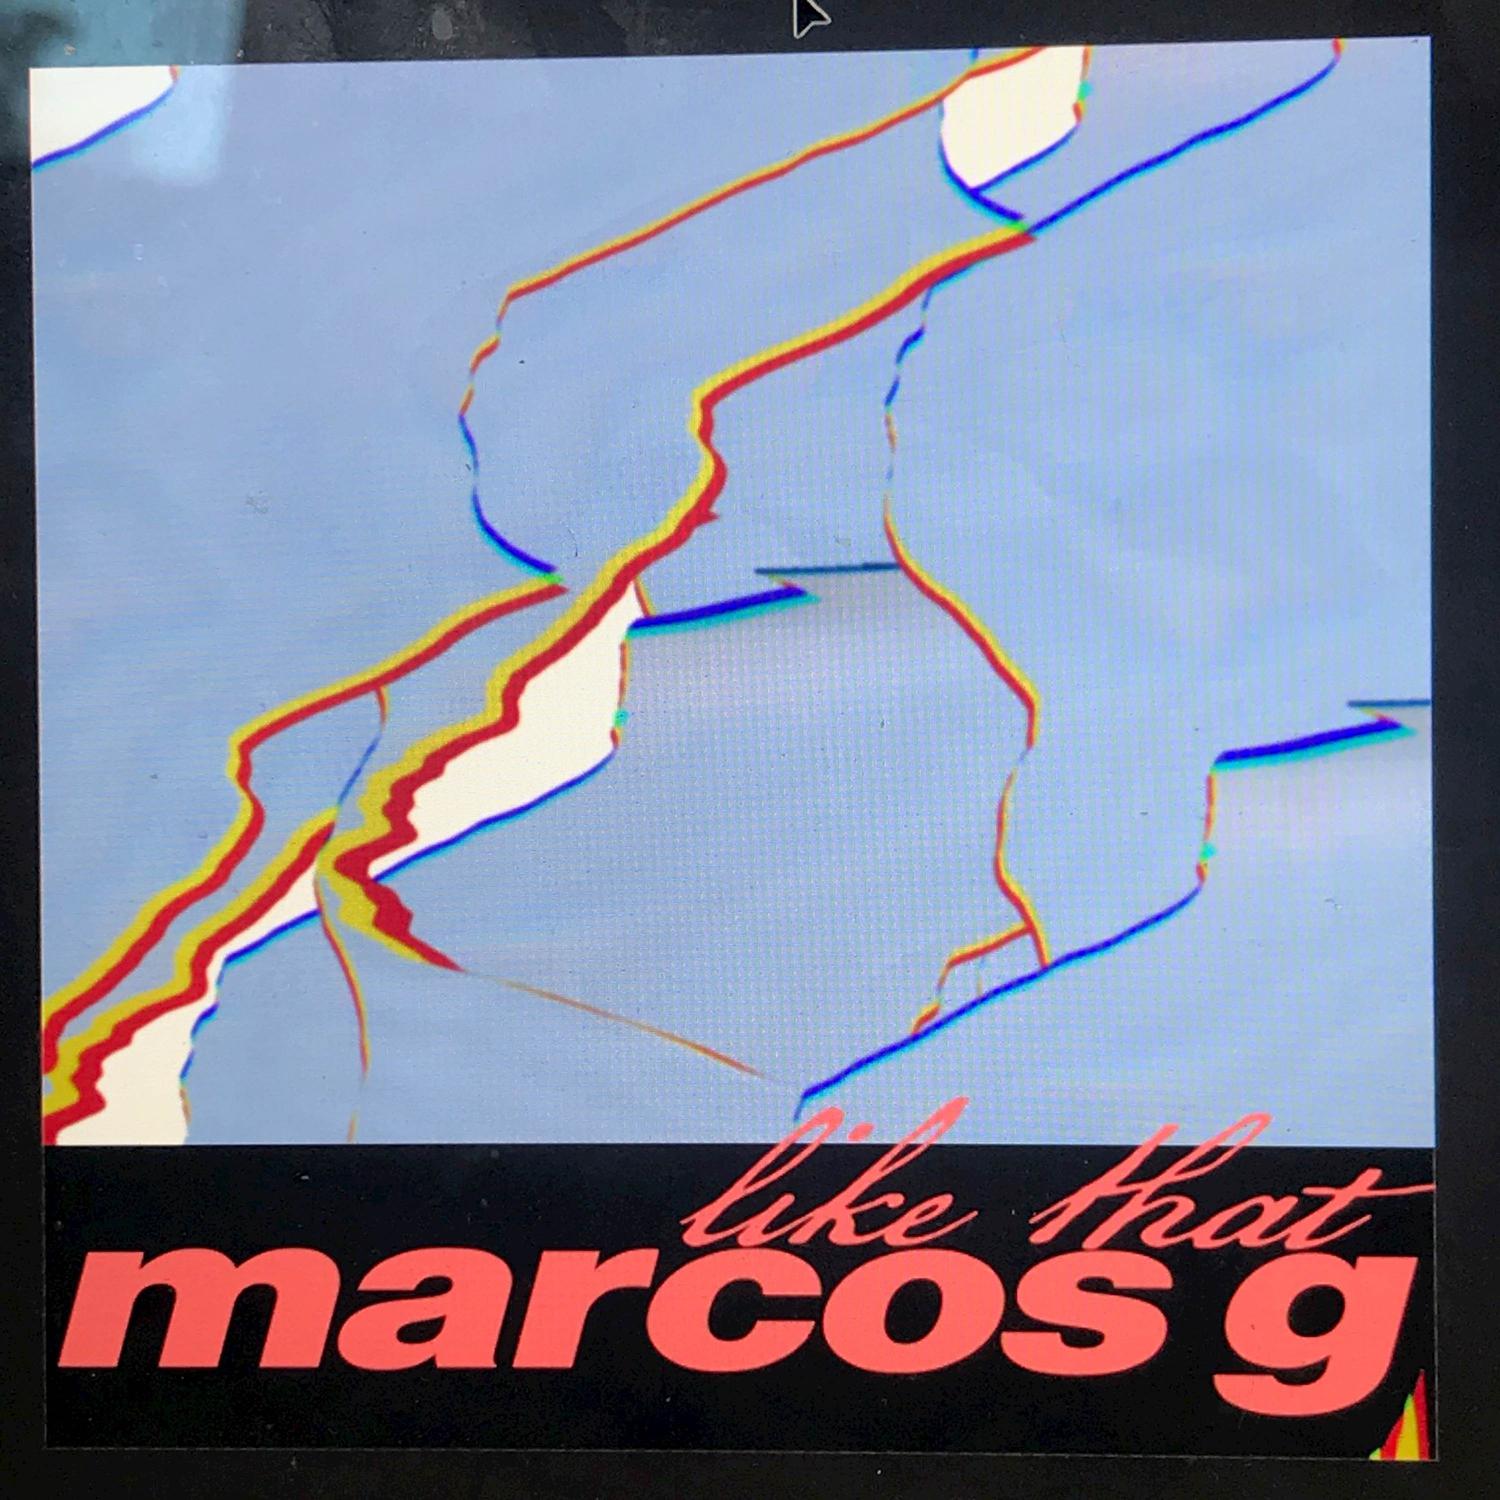 marcos g - like that